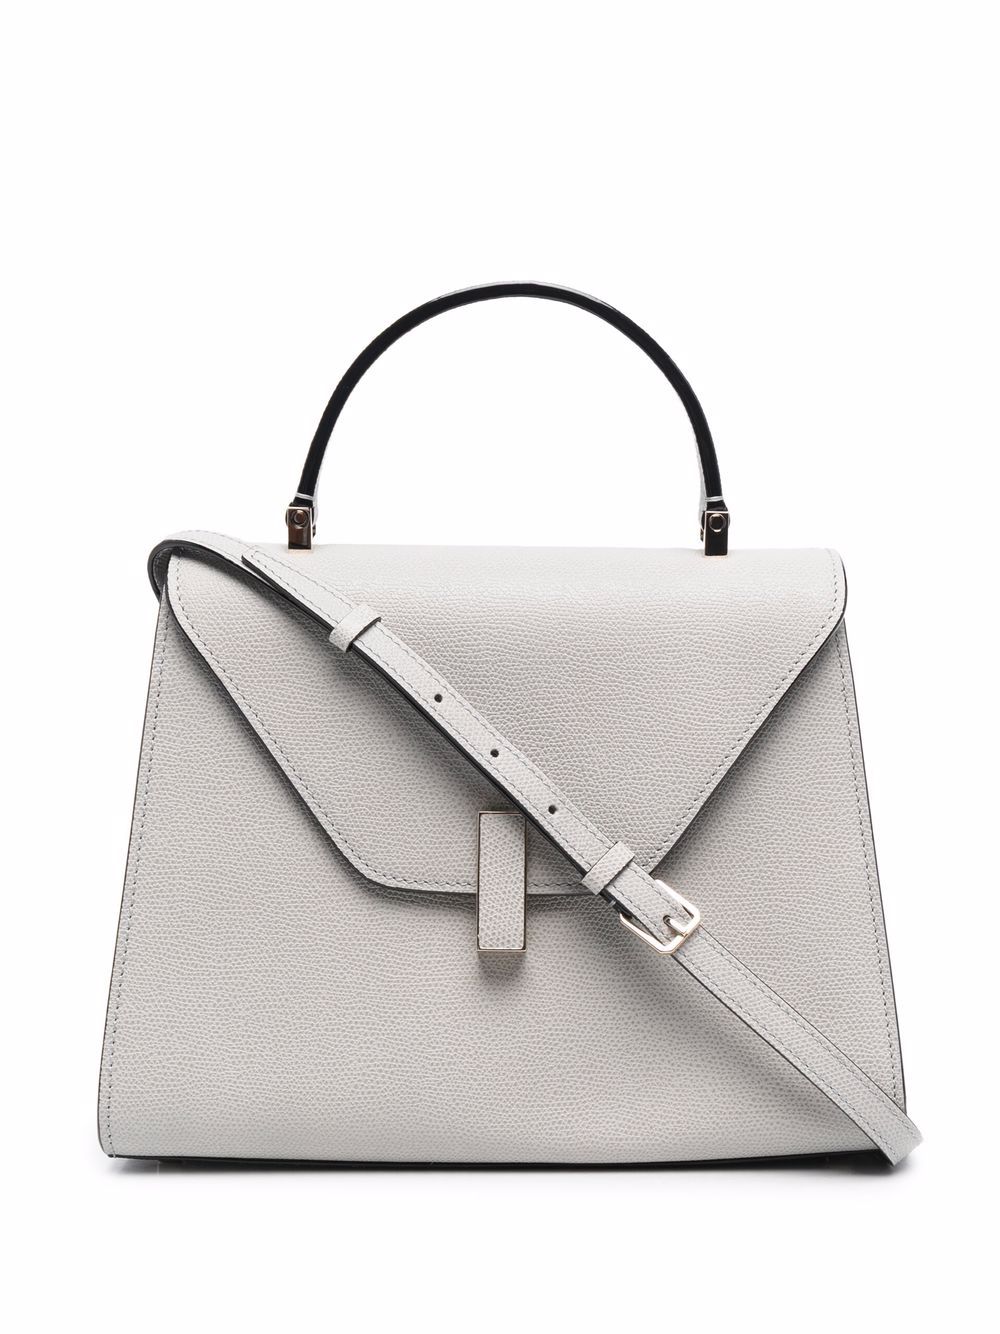 Valextra Iside Leather Tote - Farfetch